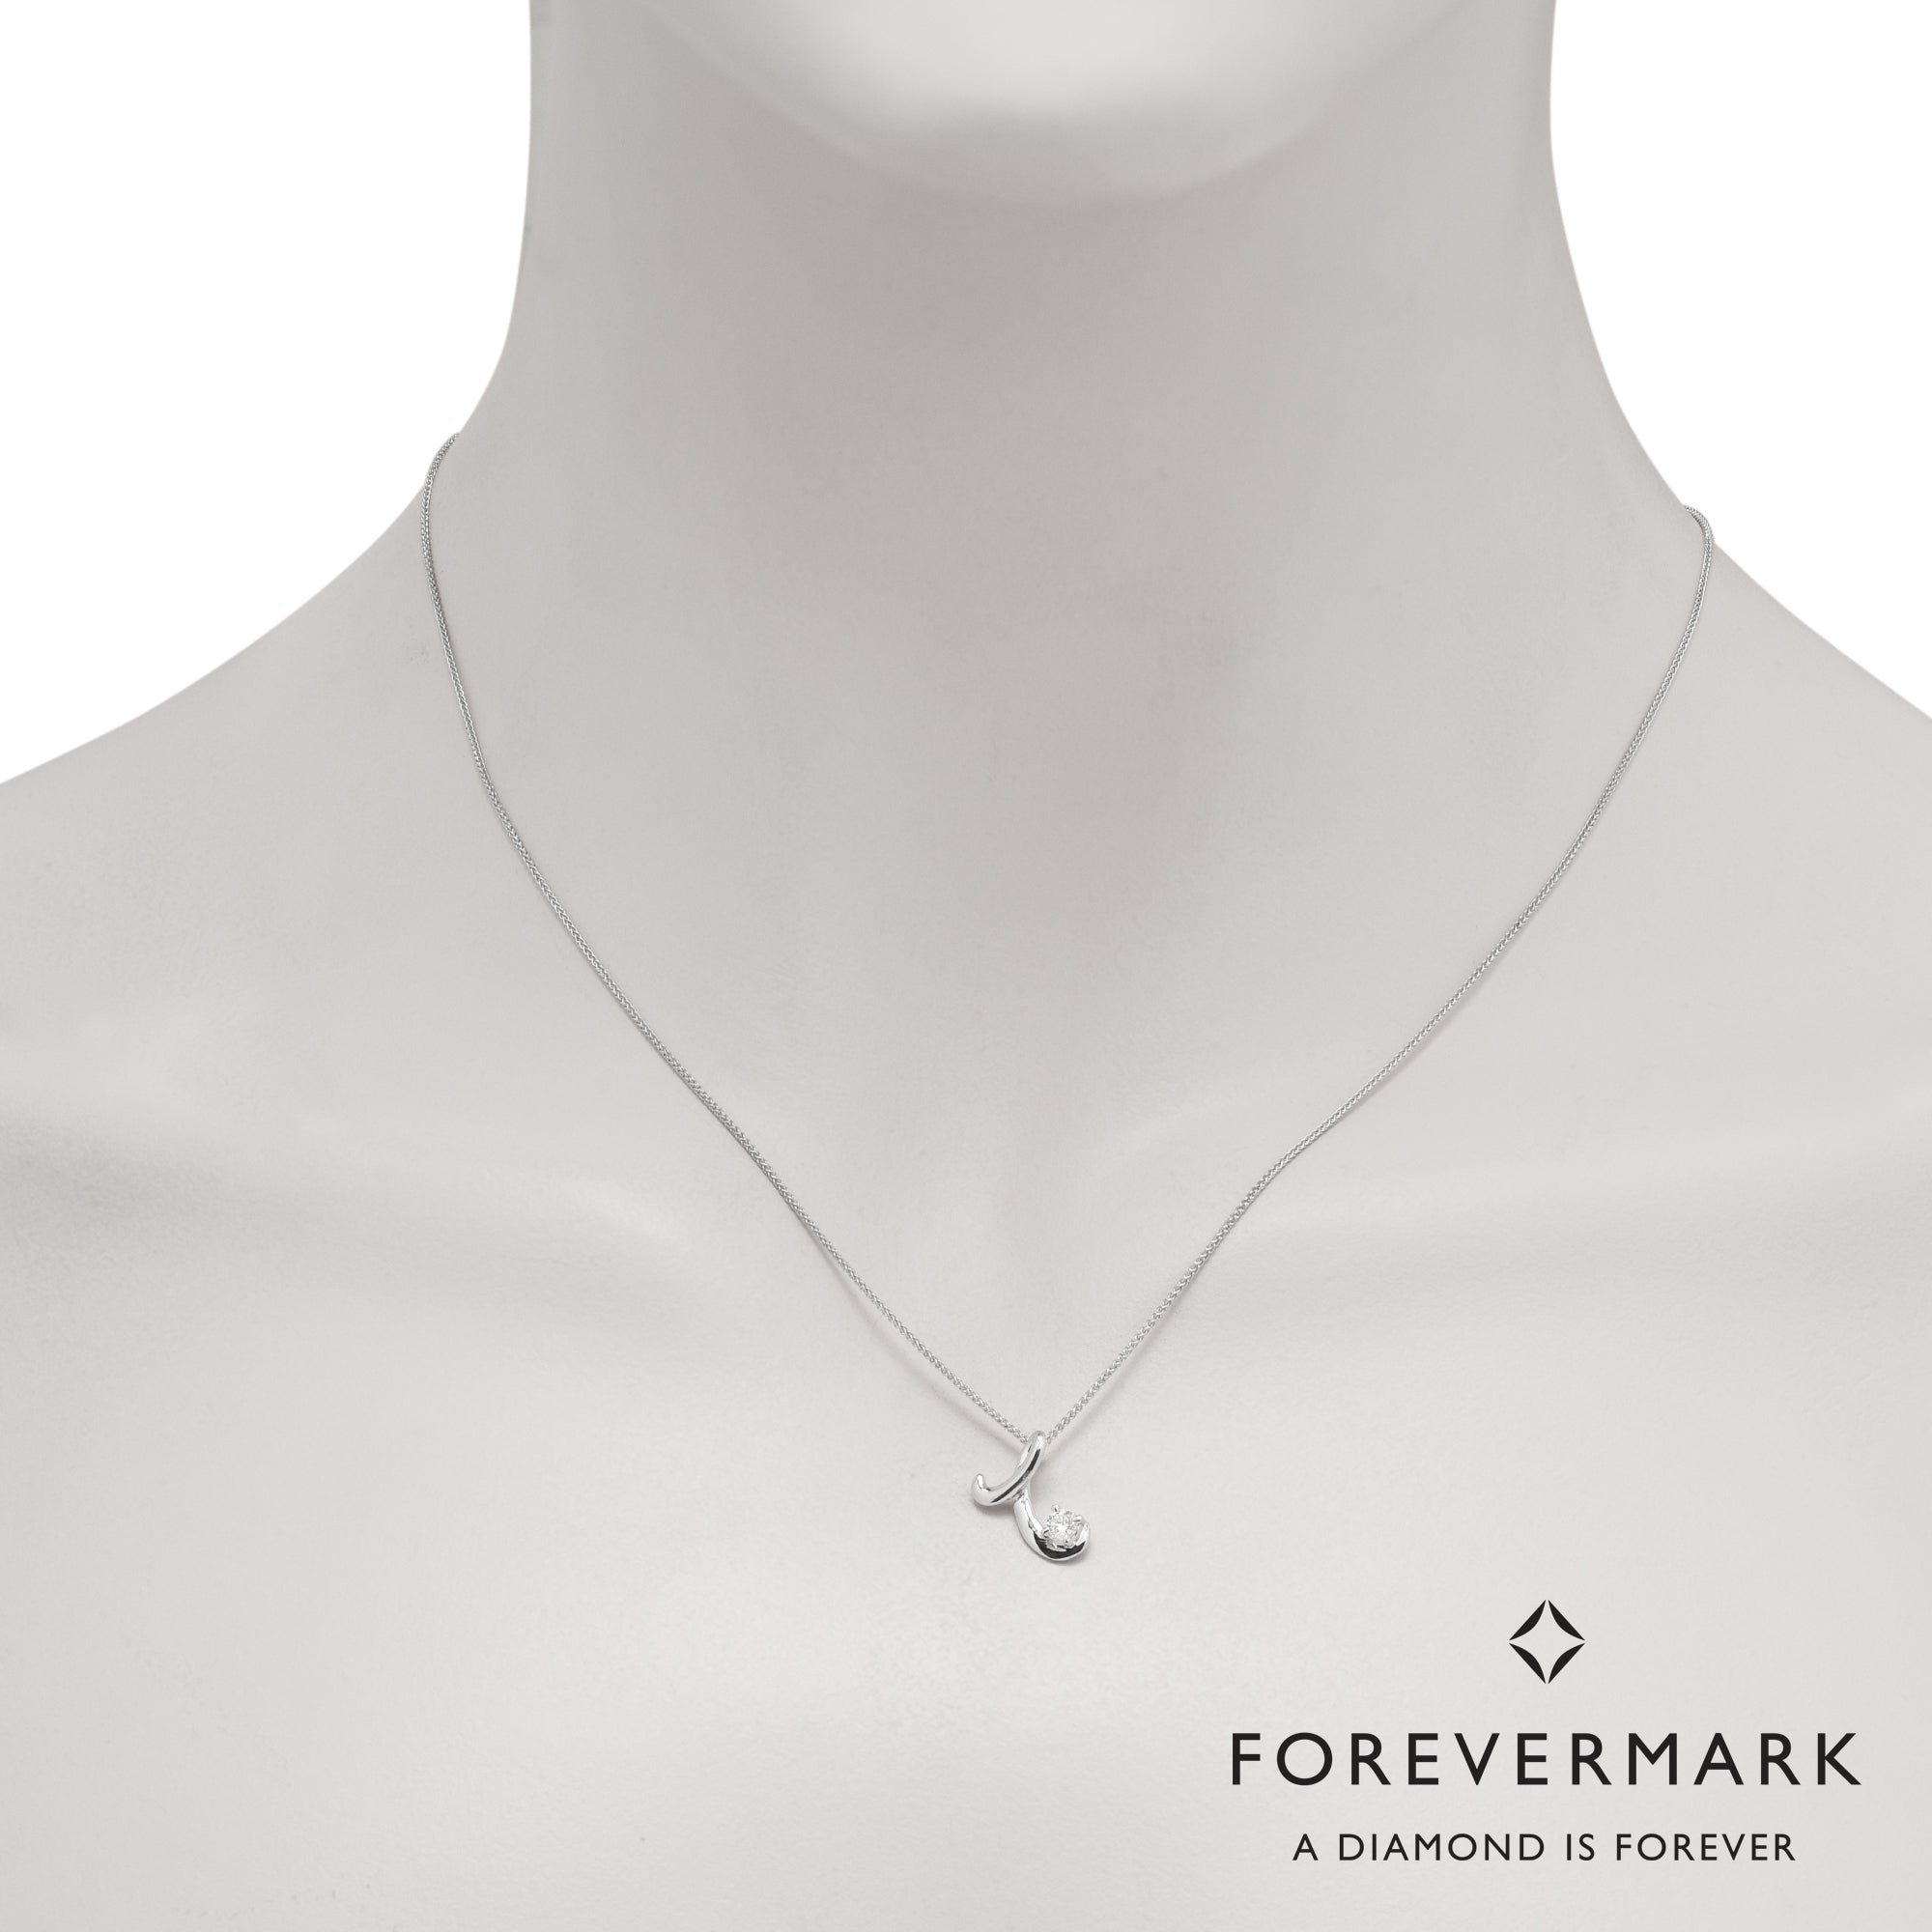 De Beers Forevermark T Initial Diamond Necklace in 18kt White Gold (1/10ct)